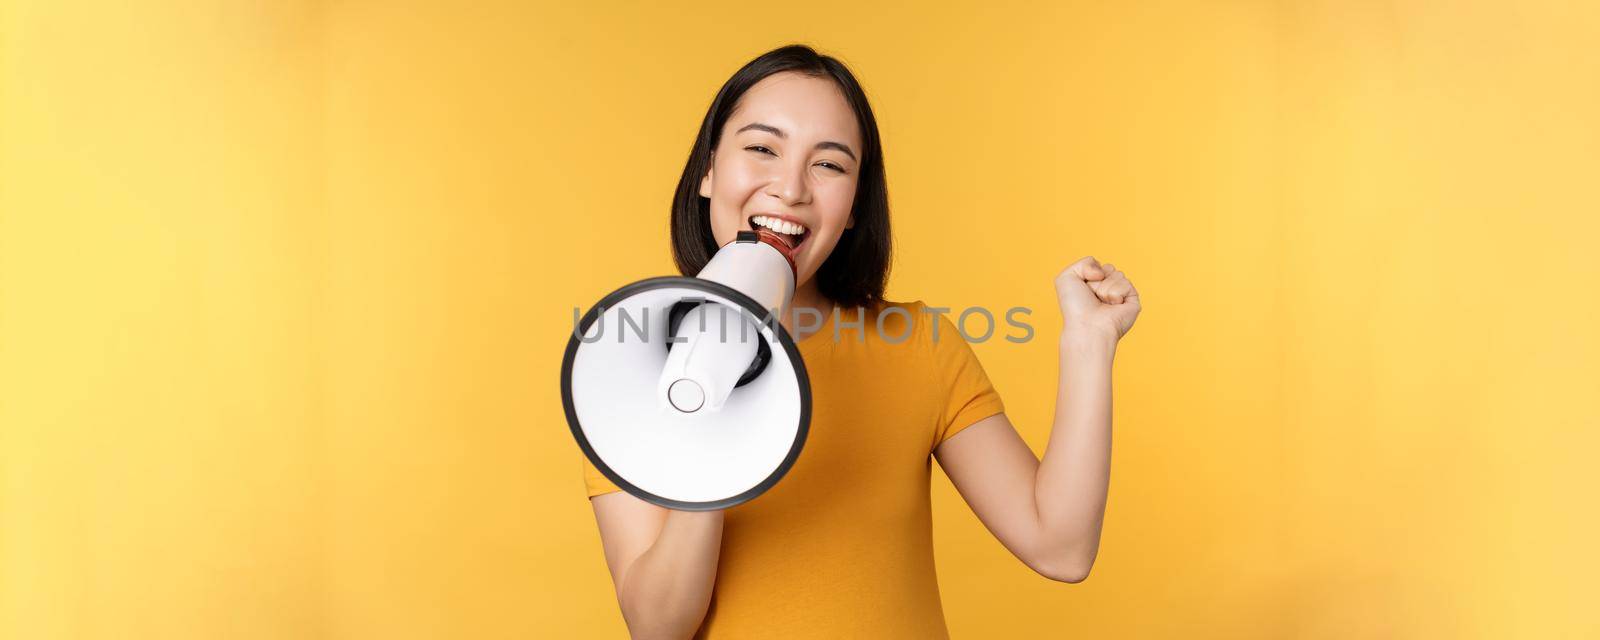 Smiling asian woman standing with megaphone, announcing smth, advertising product, standing over yellow background.